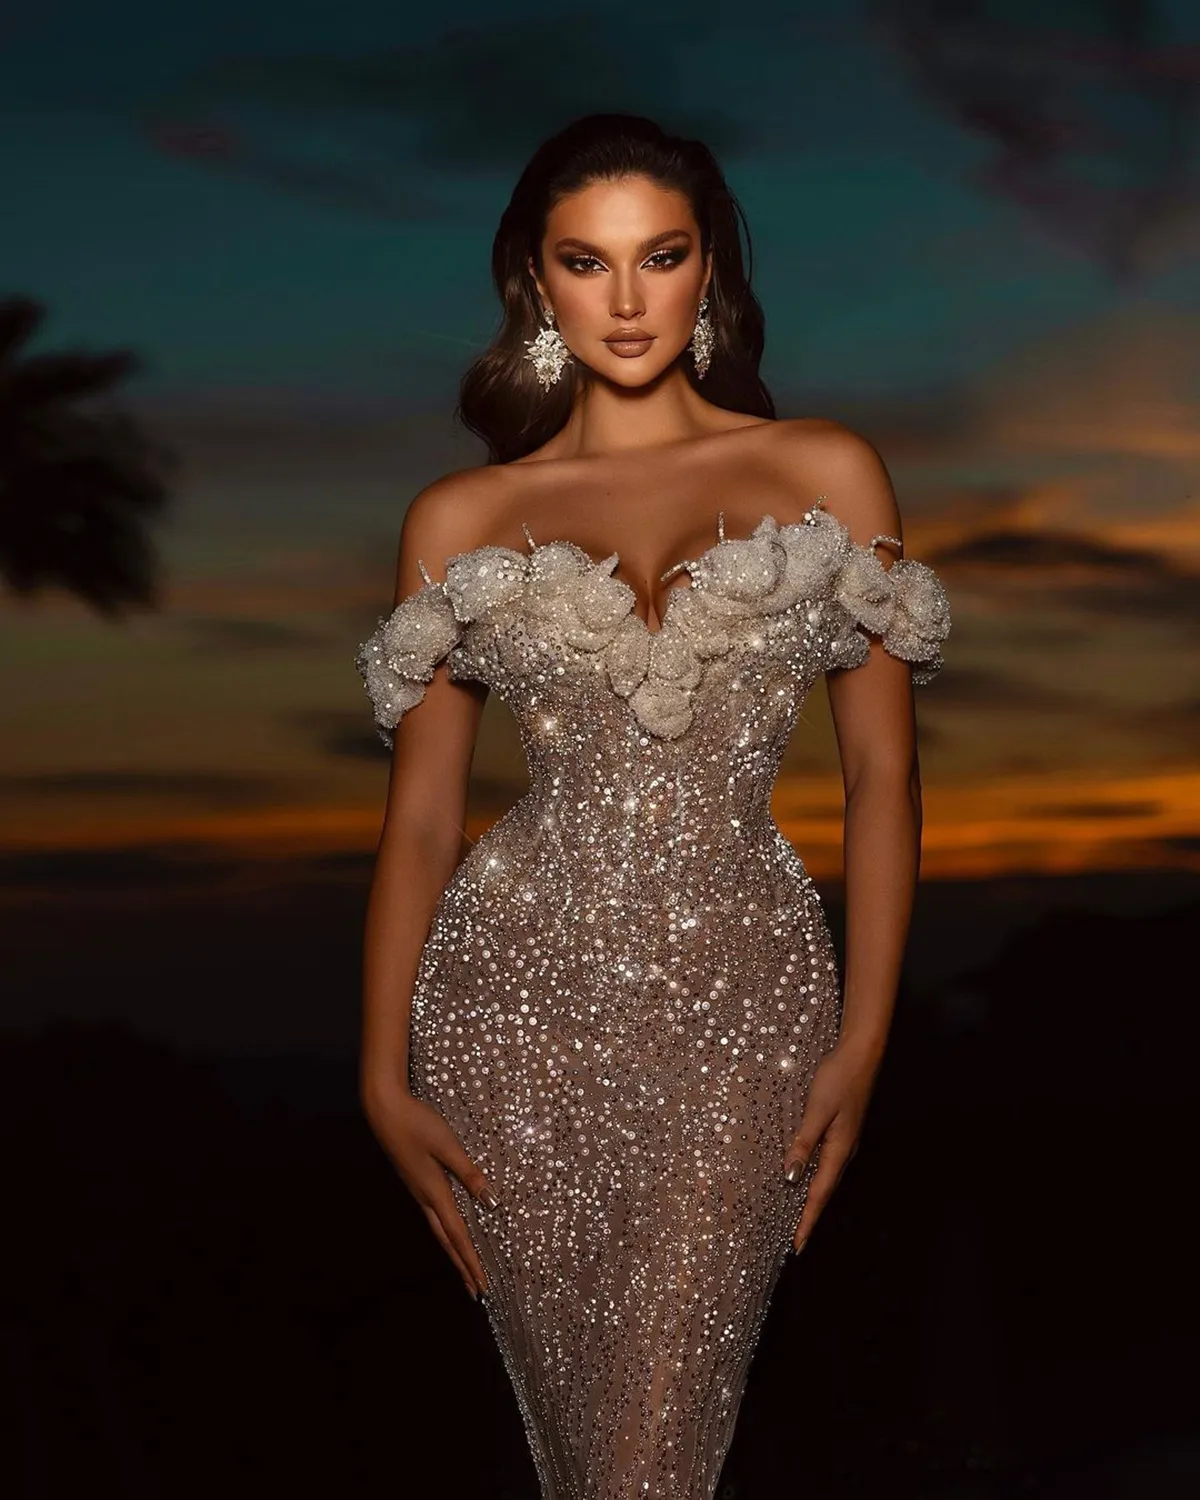 Glamorous Prom Dresses Mermaid Sweetheart Off the Shoulder Whole Body Beaded Backless Sequins Chapel Gown Custom Made Evening Dress Plus Size Robes